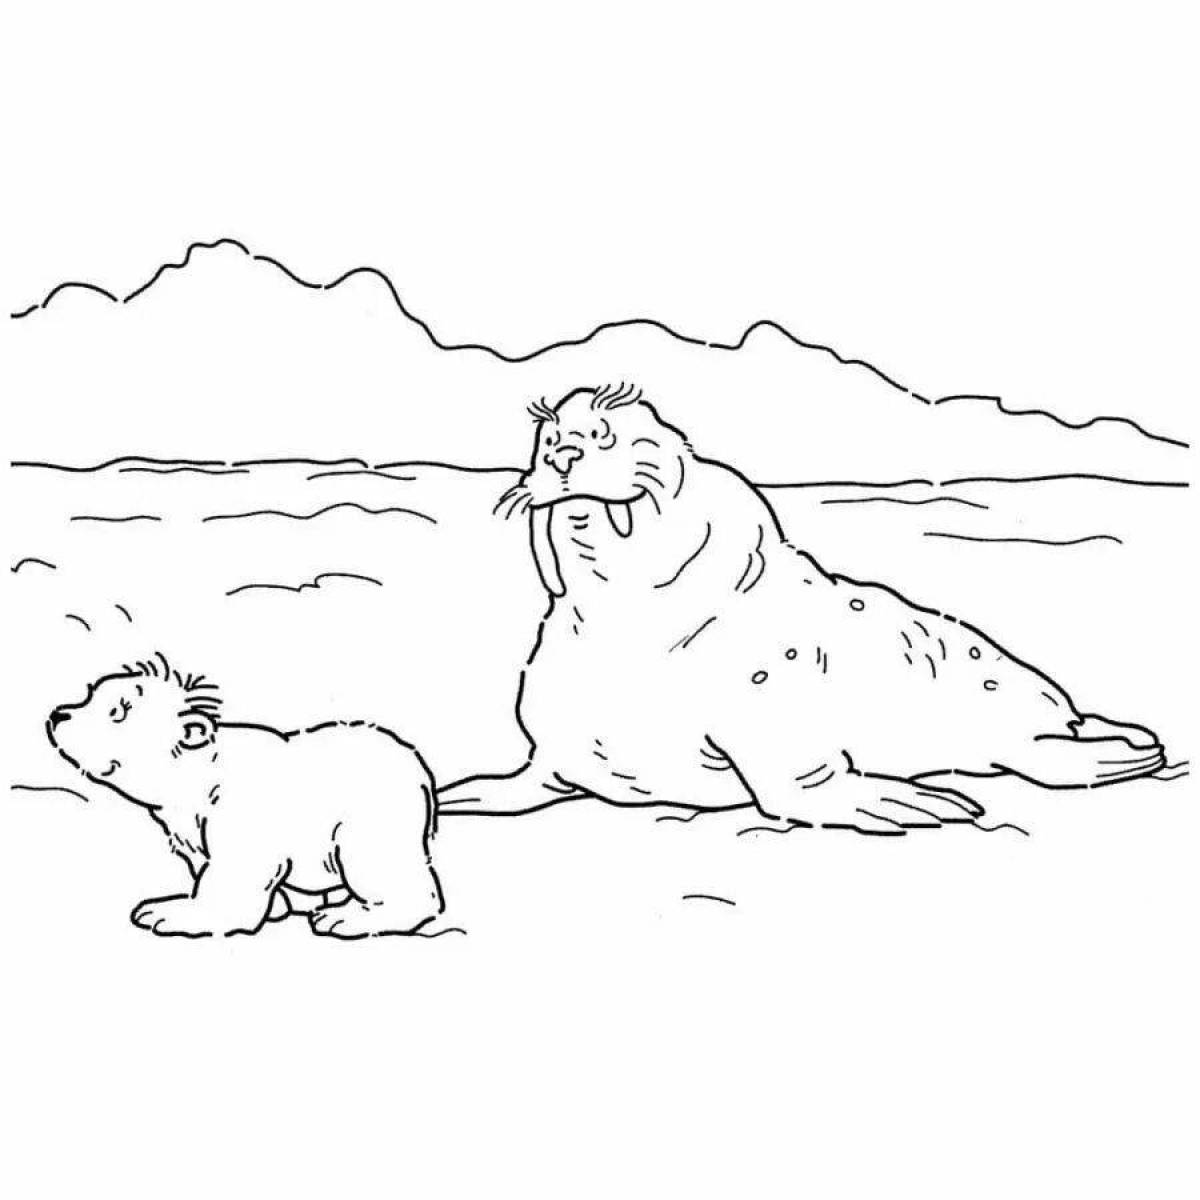 Glowing north pole coloring page